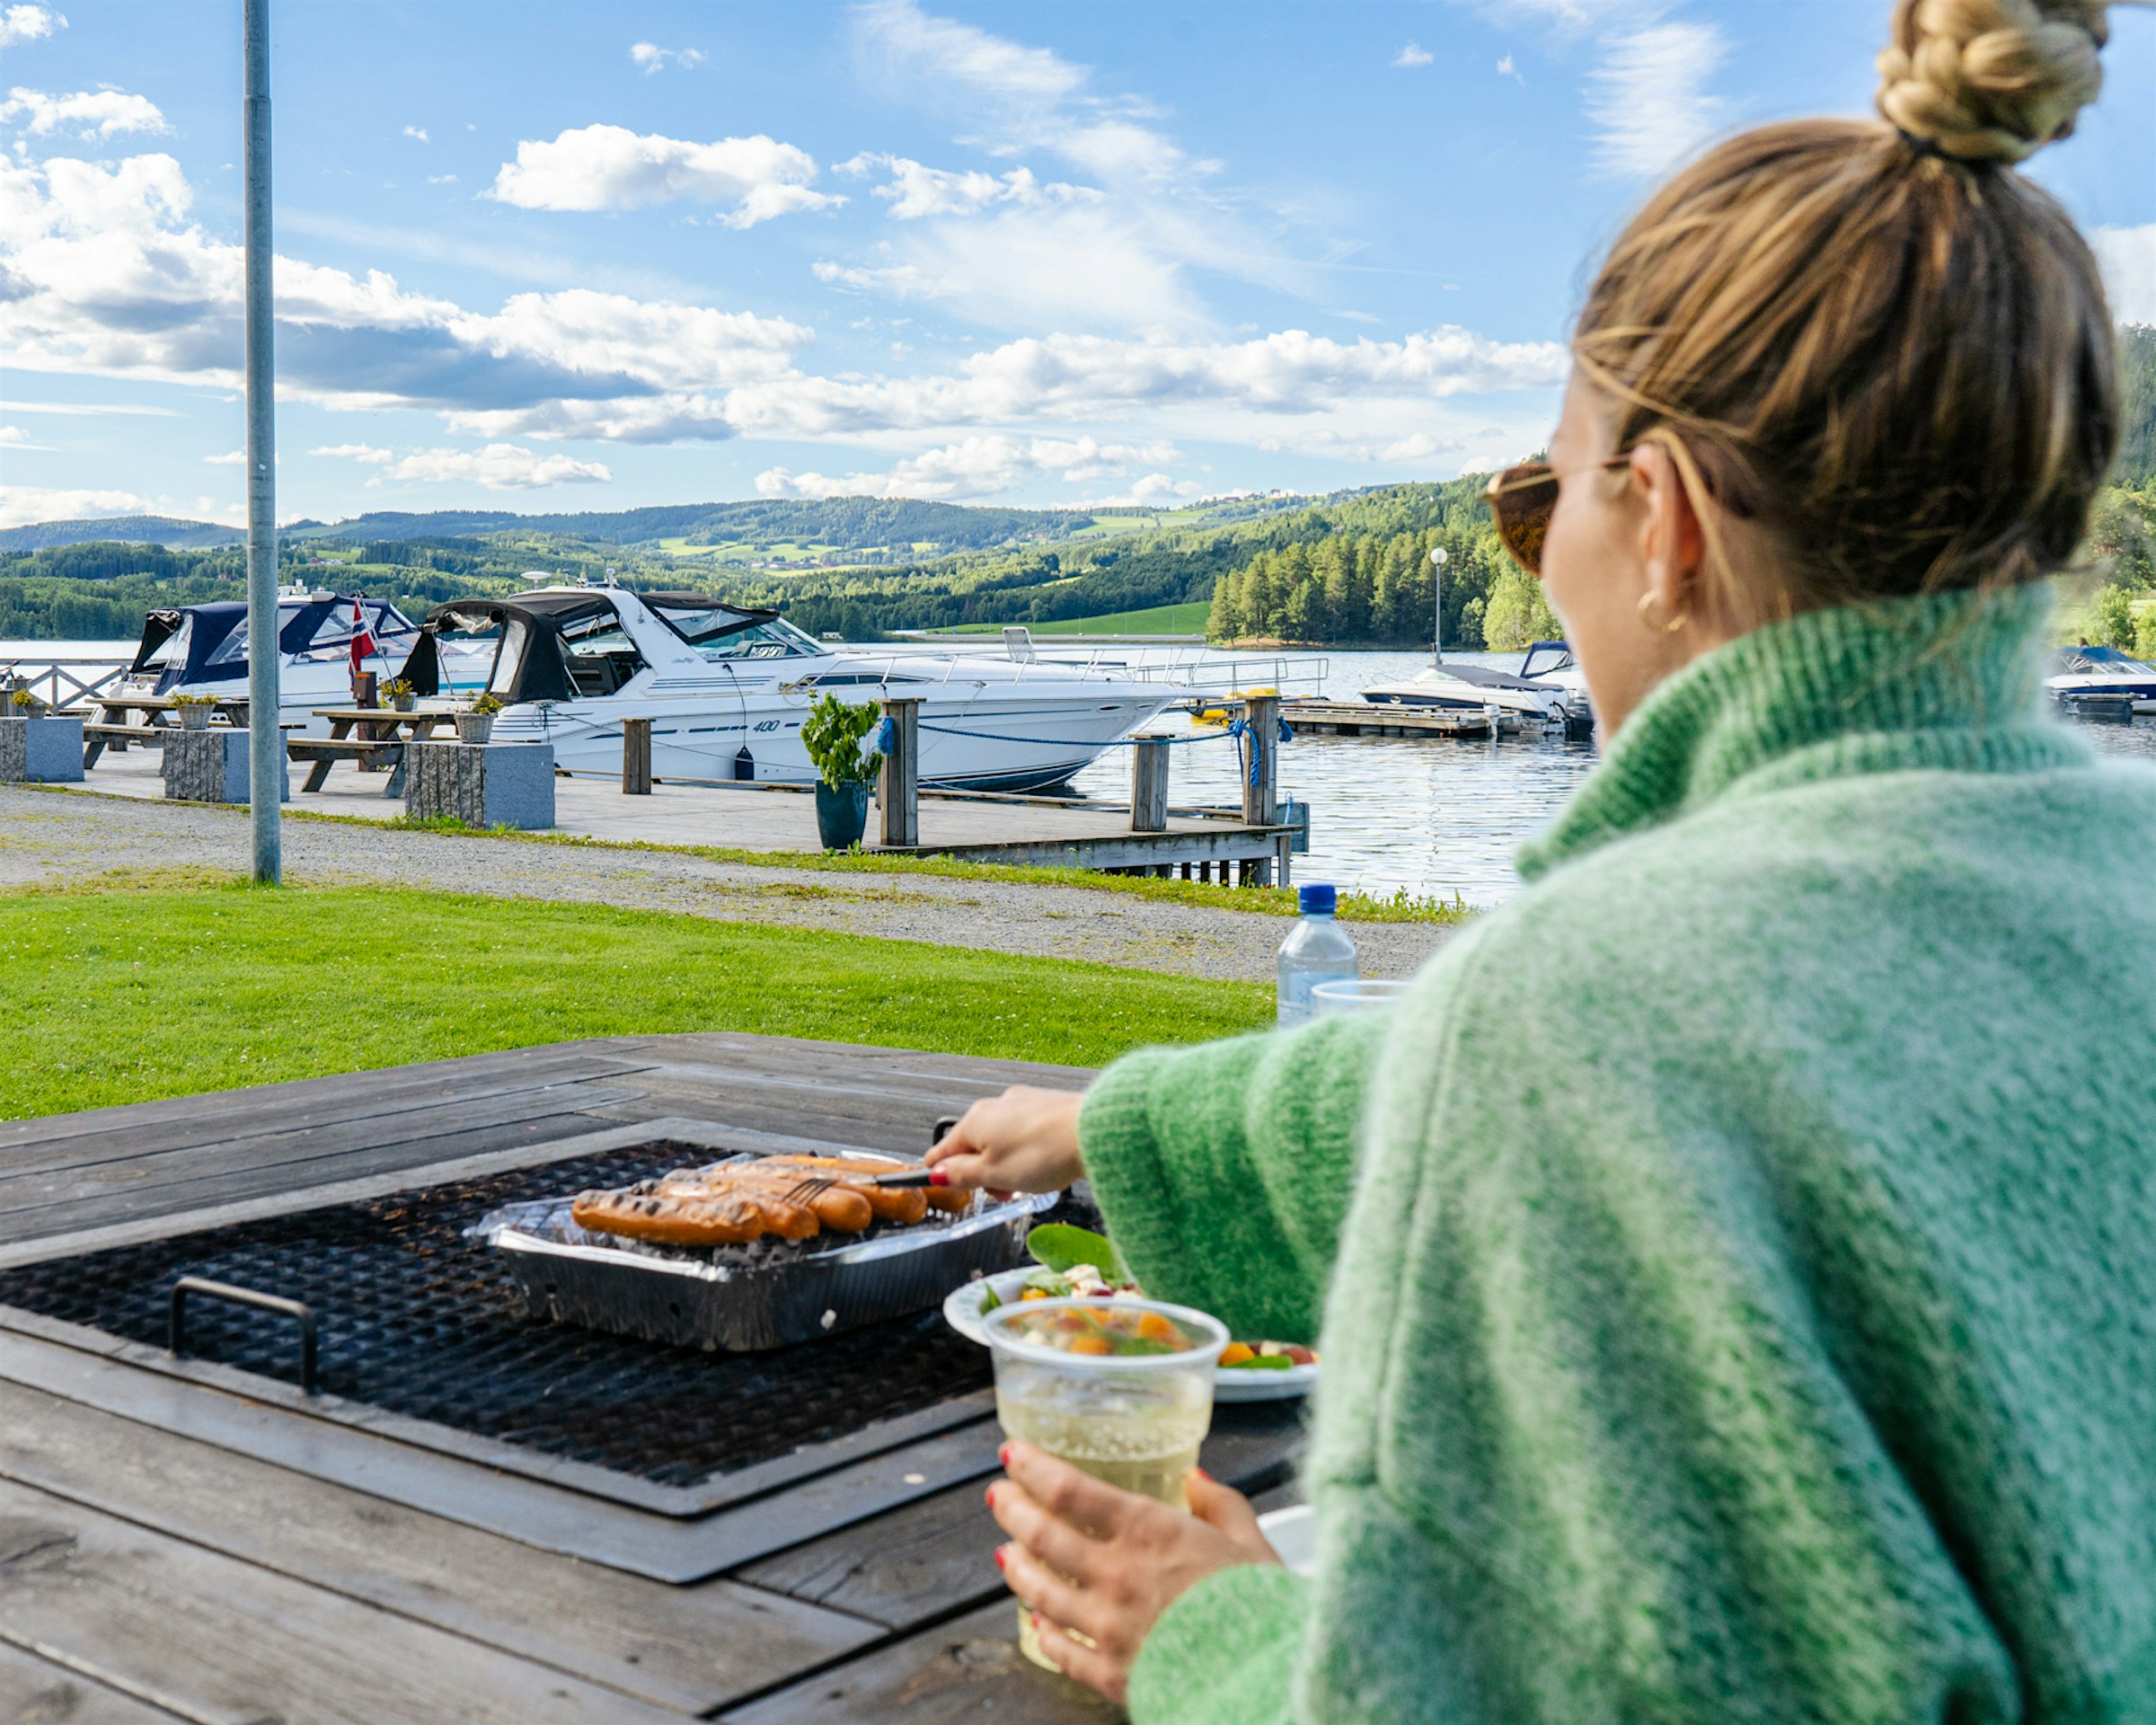 Girl sits barbecuing with a view of Mjøsa and boats. Photo